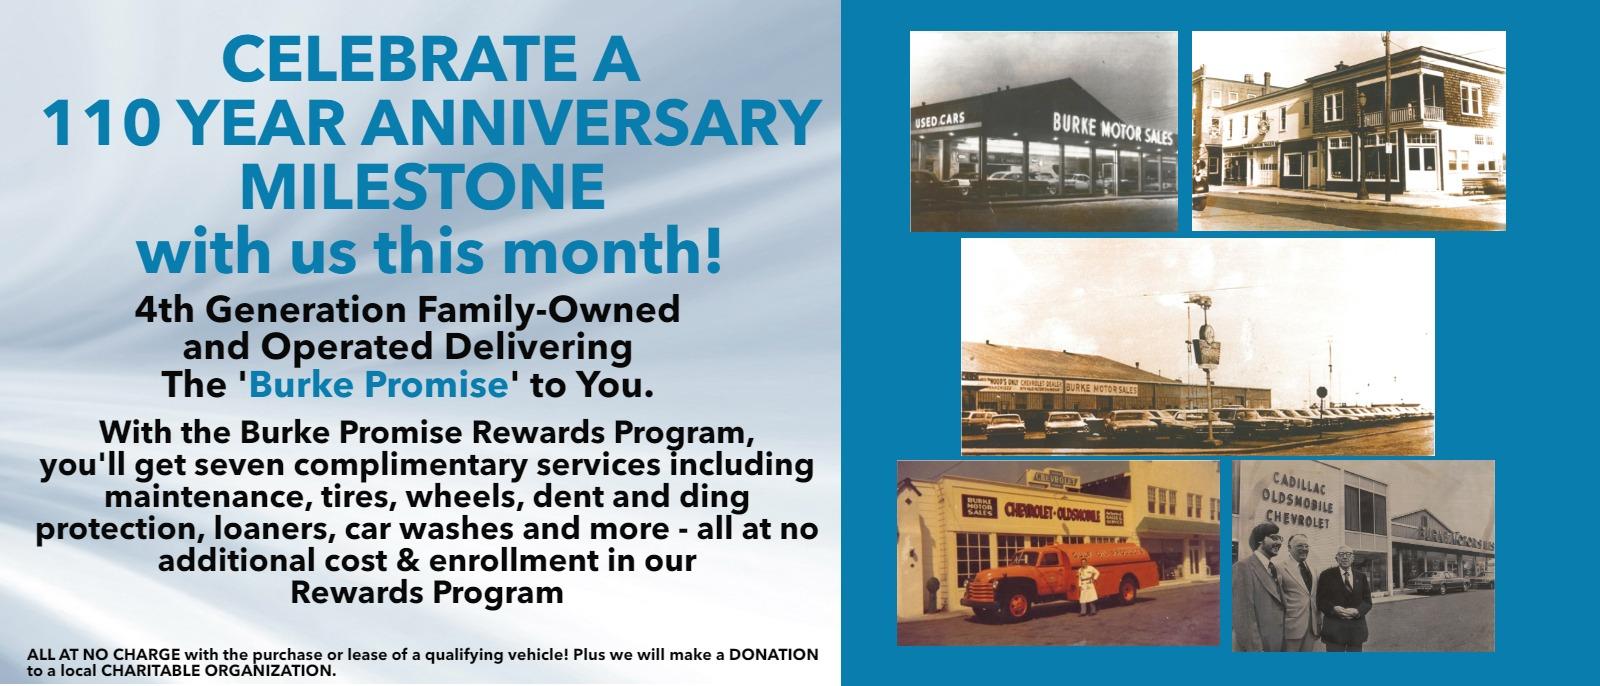 CELEBRATE A 110 YEAR ANNIVERSARY MILESTONE with us this month!
4th Generation Family-Owned and Operated delivering The 'Burke Promise' to you.

With the Burke Promise Rewards Program, you'll get seven complimentary services including maintenance, tires, wheels, dent and ding protection, loaners, car washes and more - all at no additional cost & enrollment in our Rewards Program